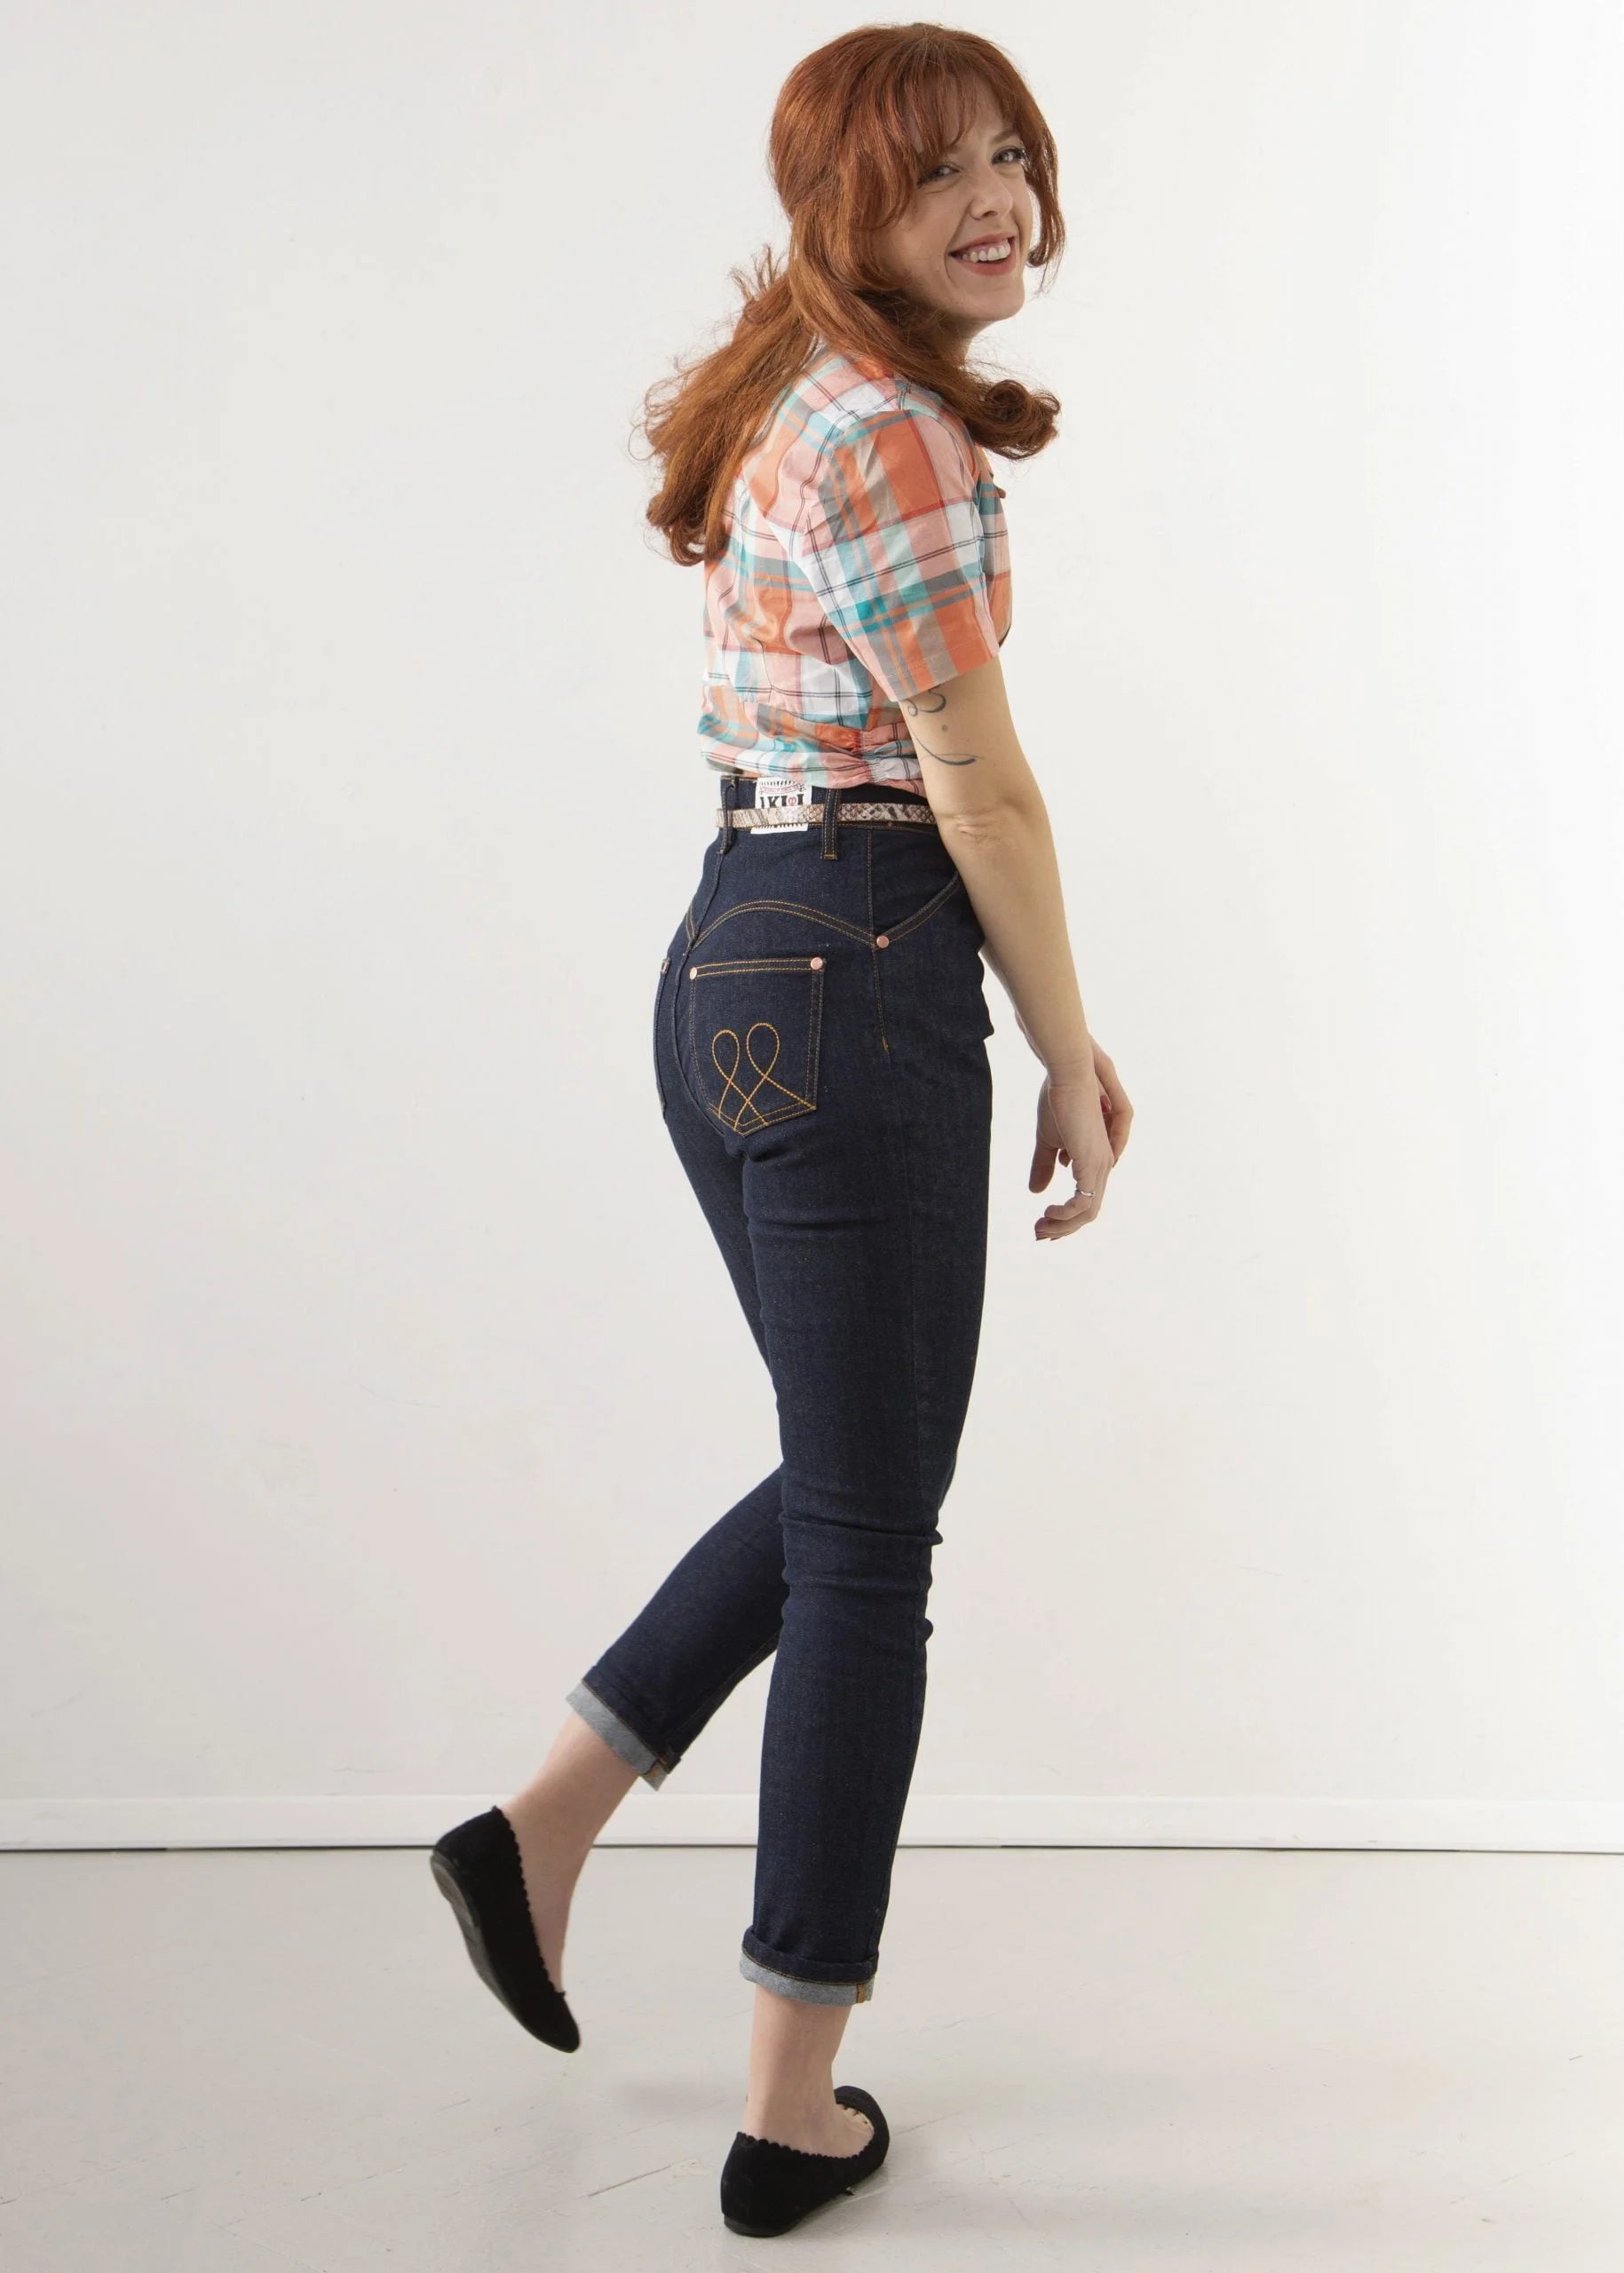 Polly Petite Jeans in Black by Lady K Loves – Hollyville Boutique